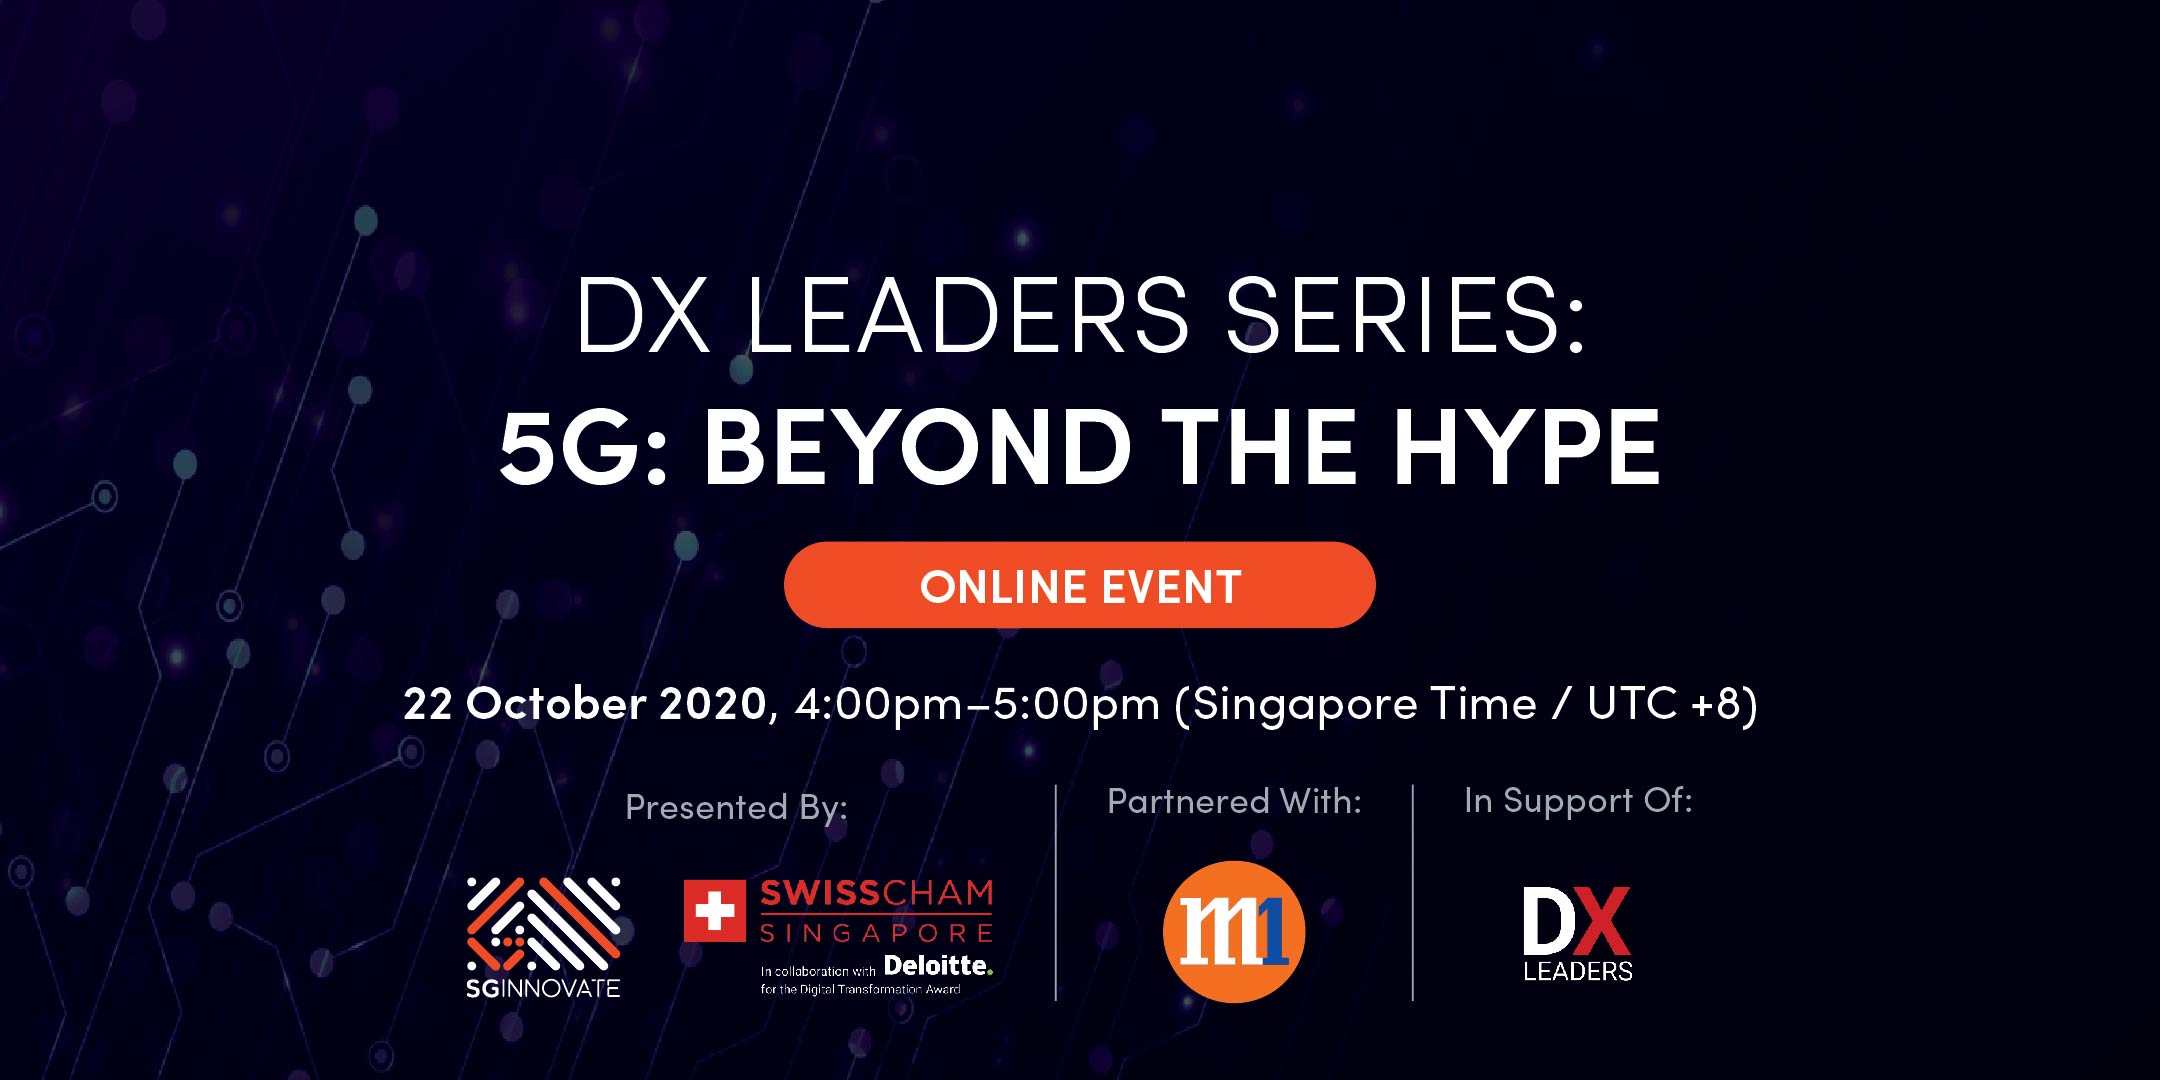 DX Leaders Series: 5G: Beyond the hype